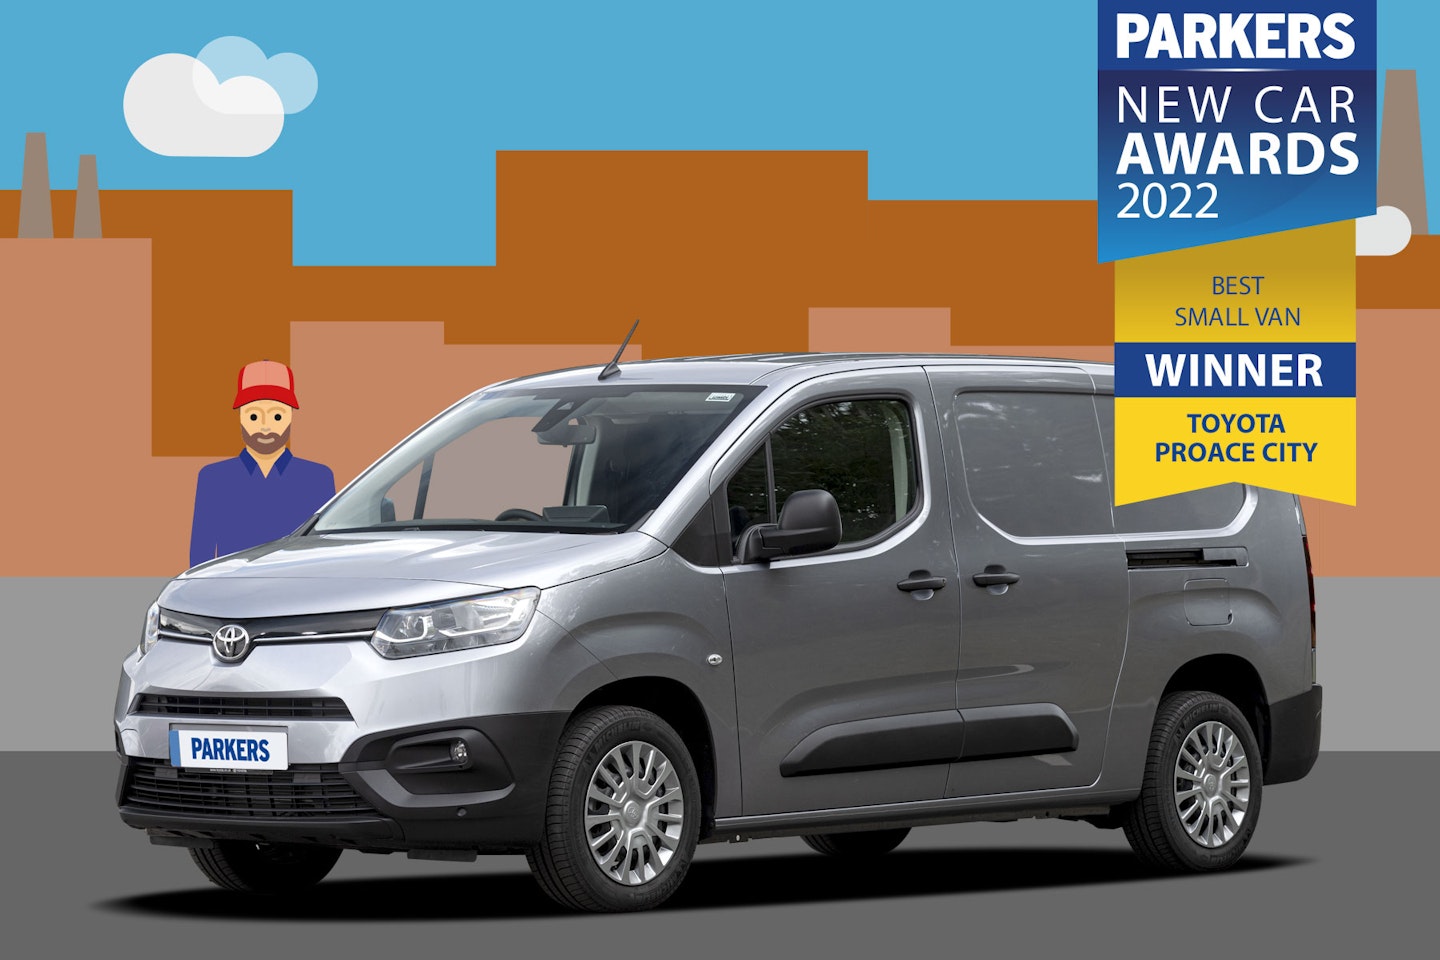 Parkers’ Best Small Van award goes to the Toyota Proace City